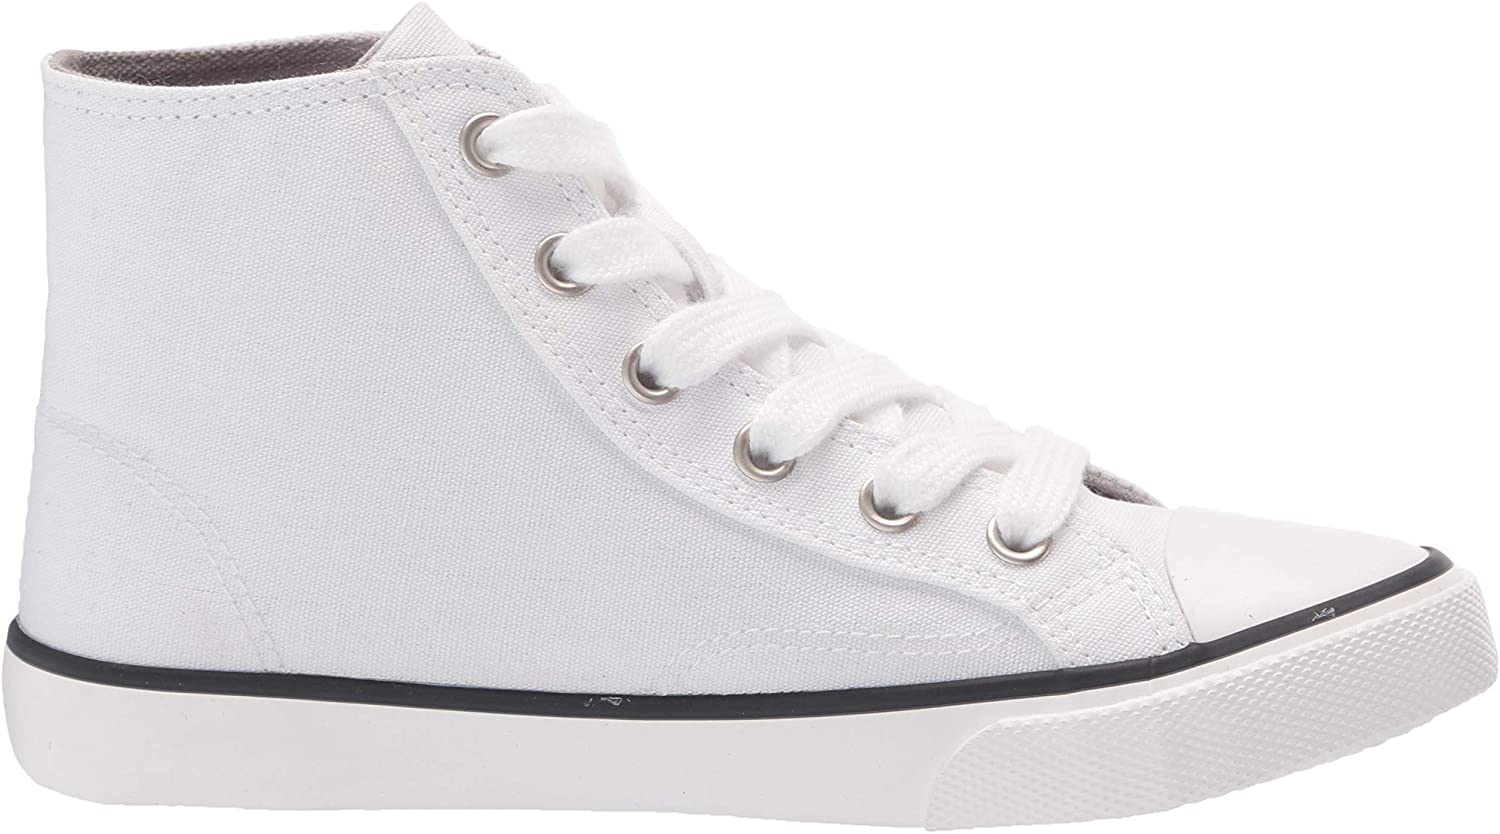 Essentials Kids' Canvas Lace Up Sneaker, White, Size 0.0 VF9D | eBay